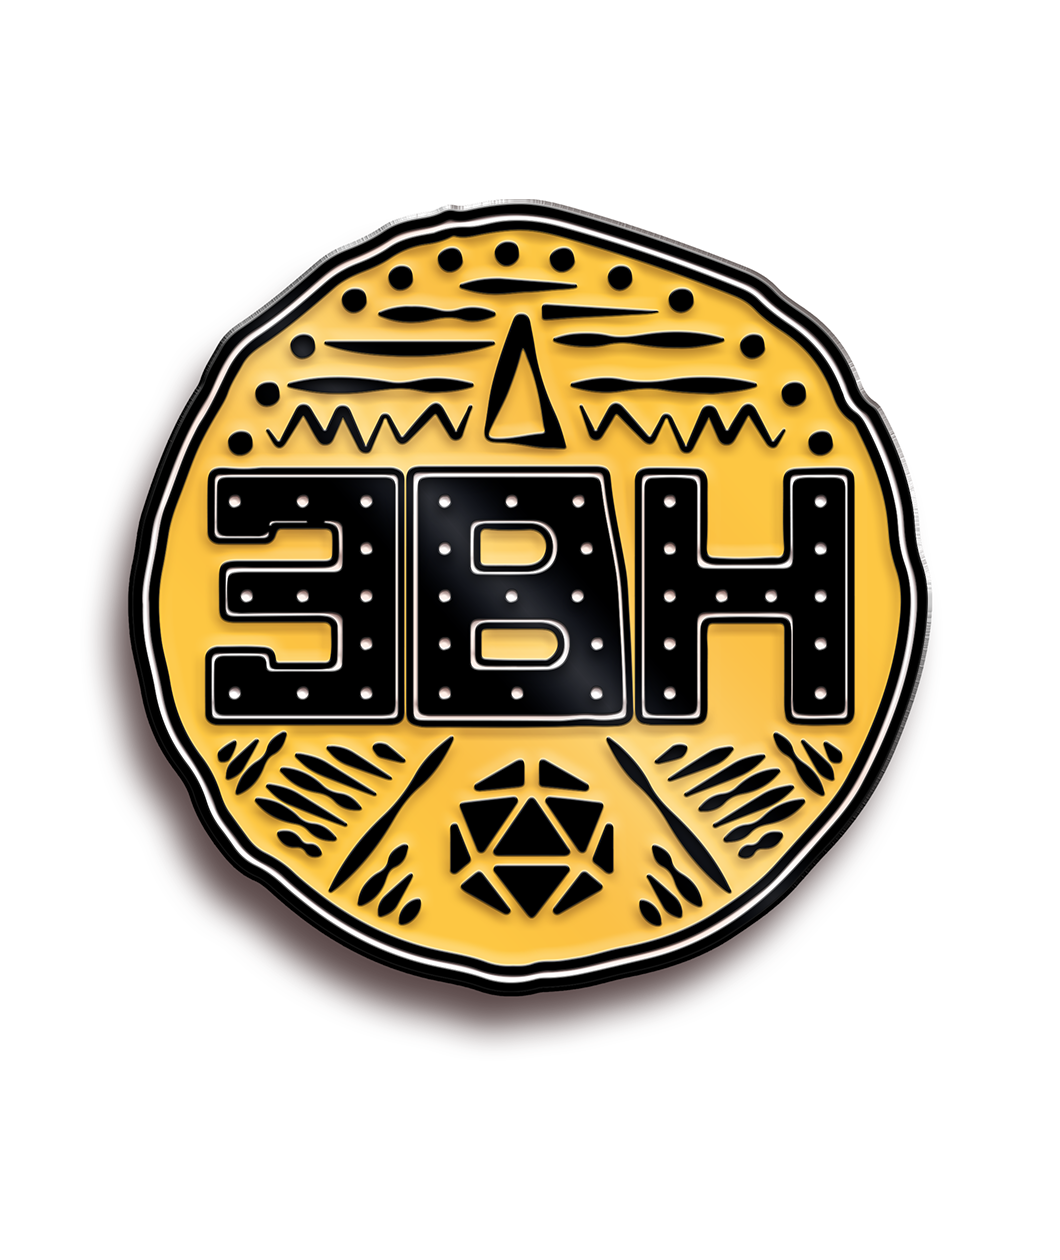 A black and yellow logo pin from Three Black Halflings. In the middle are black, block text 